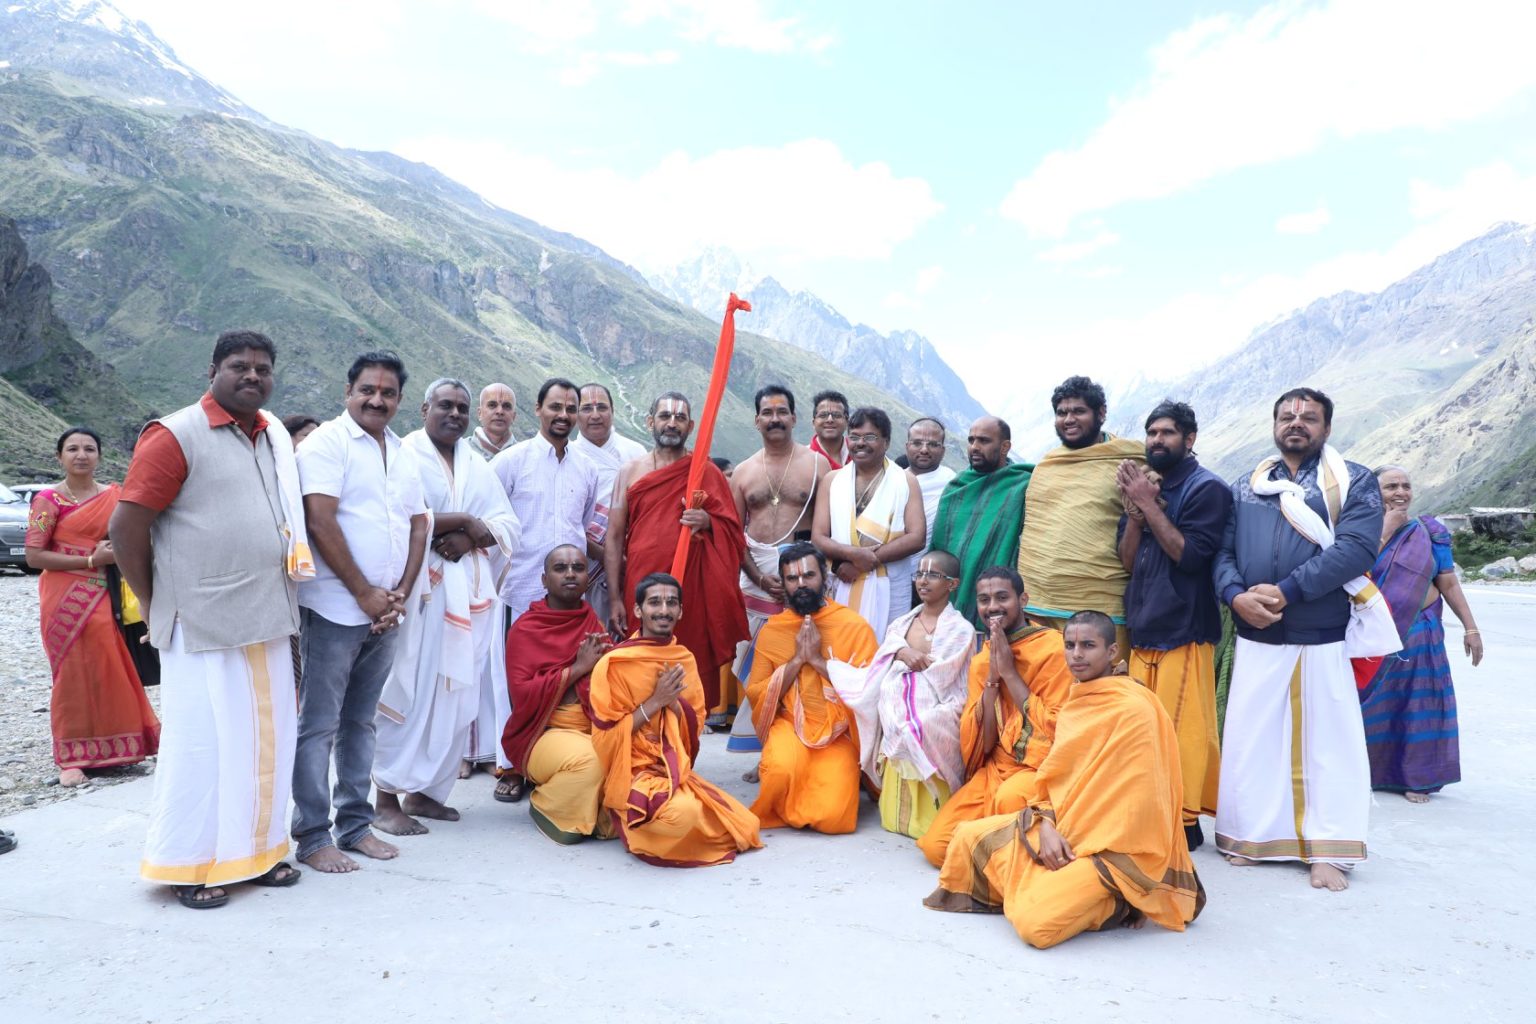 Badarinath, the Birth place of Real beauty!